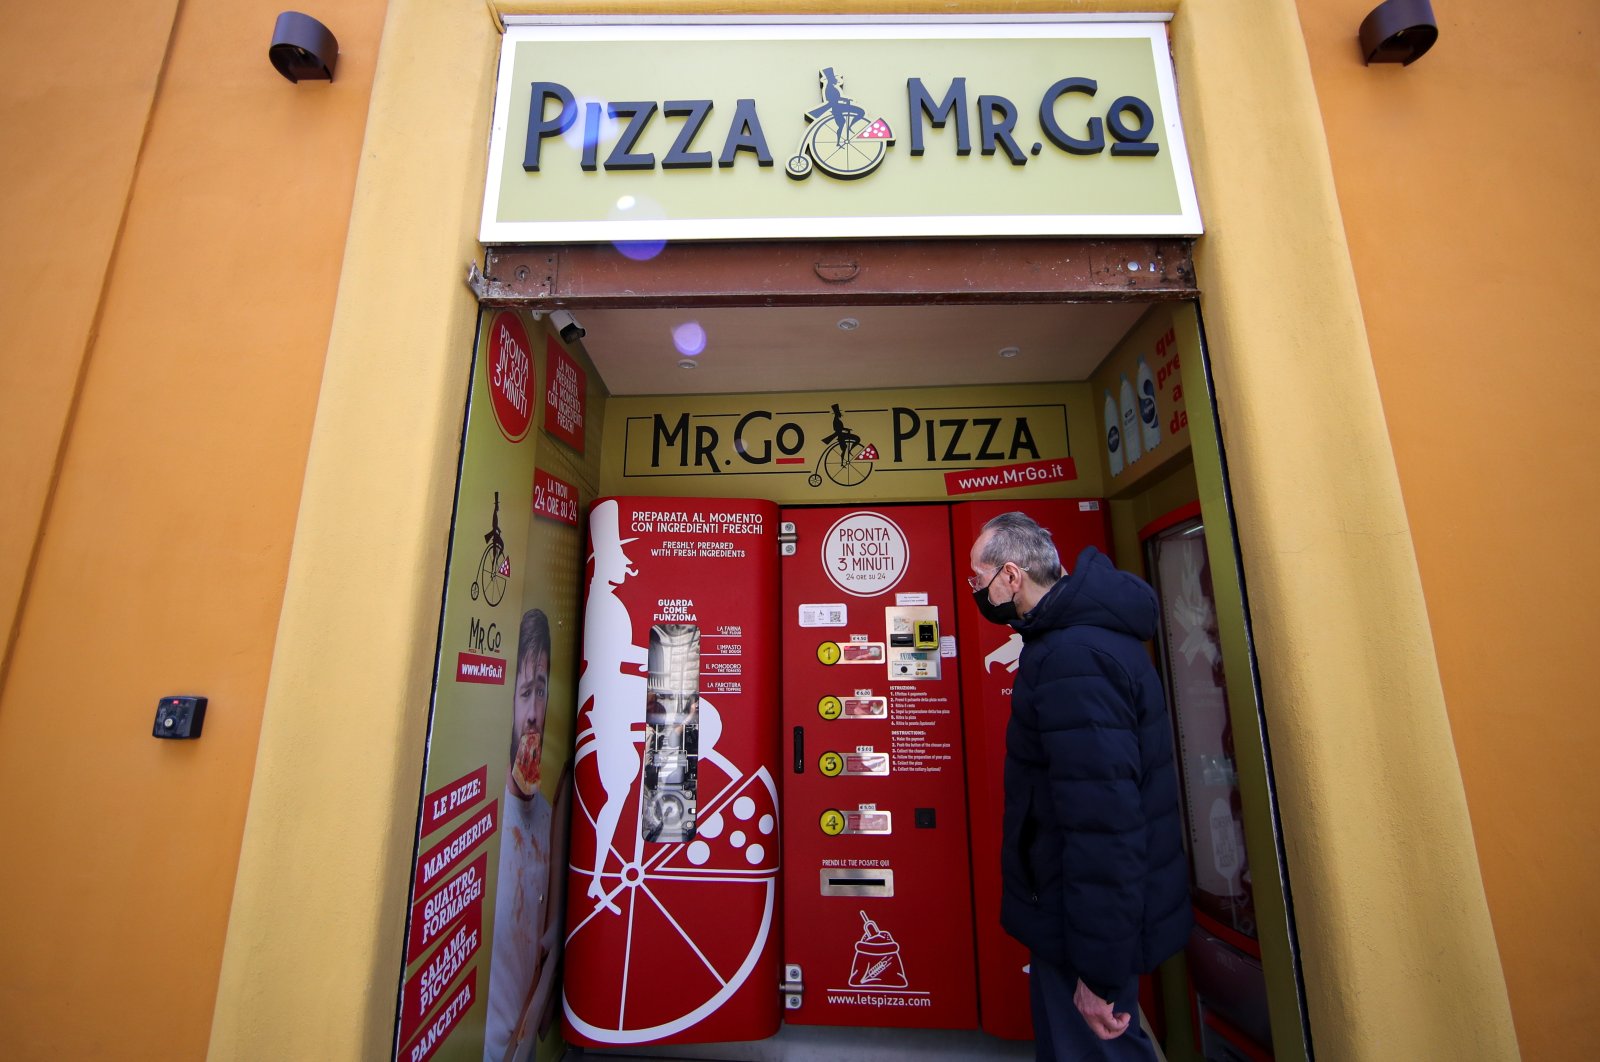 Claudio Zampiga waits for his order at the first automatic pizza vending machine, which is capable of kneading, seasoning and cooking the pizza in three minutes, in Rome, Italy, May 6, 2021. (Reuters Photo)